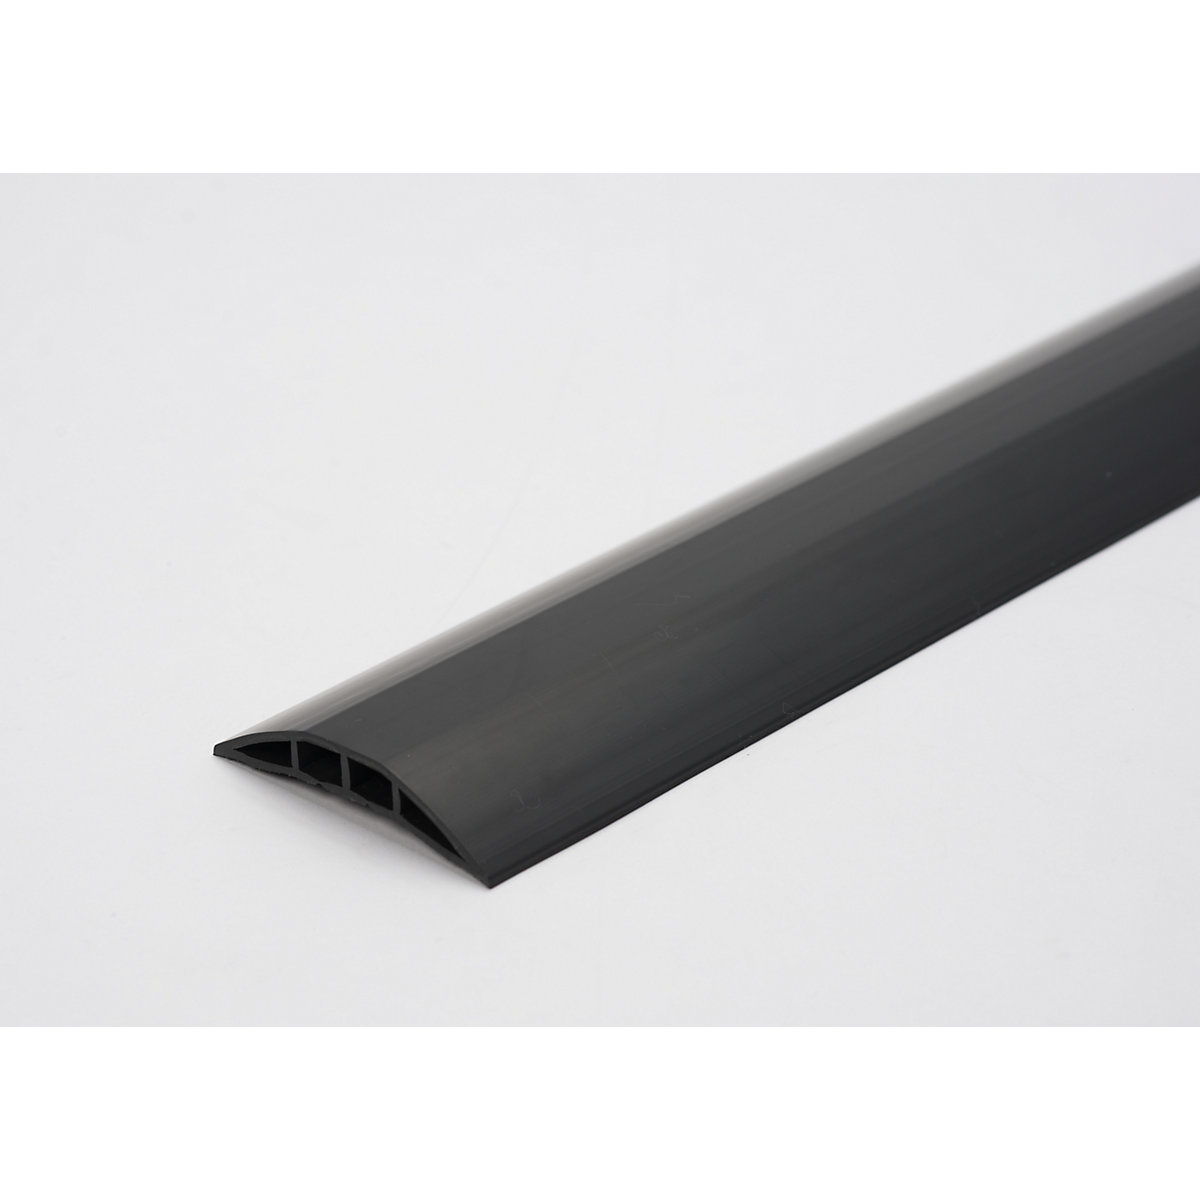 Plastic cable duct, for cables and hoses with Ø up to 7.5 mm, black, 2 chambers, length 1.5 m-3